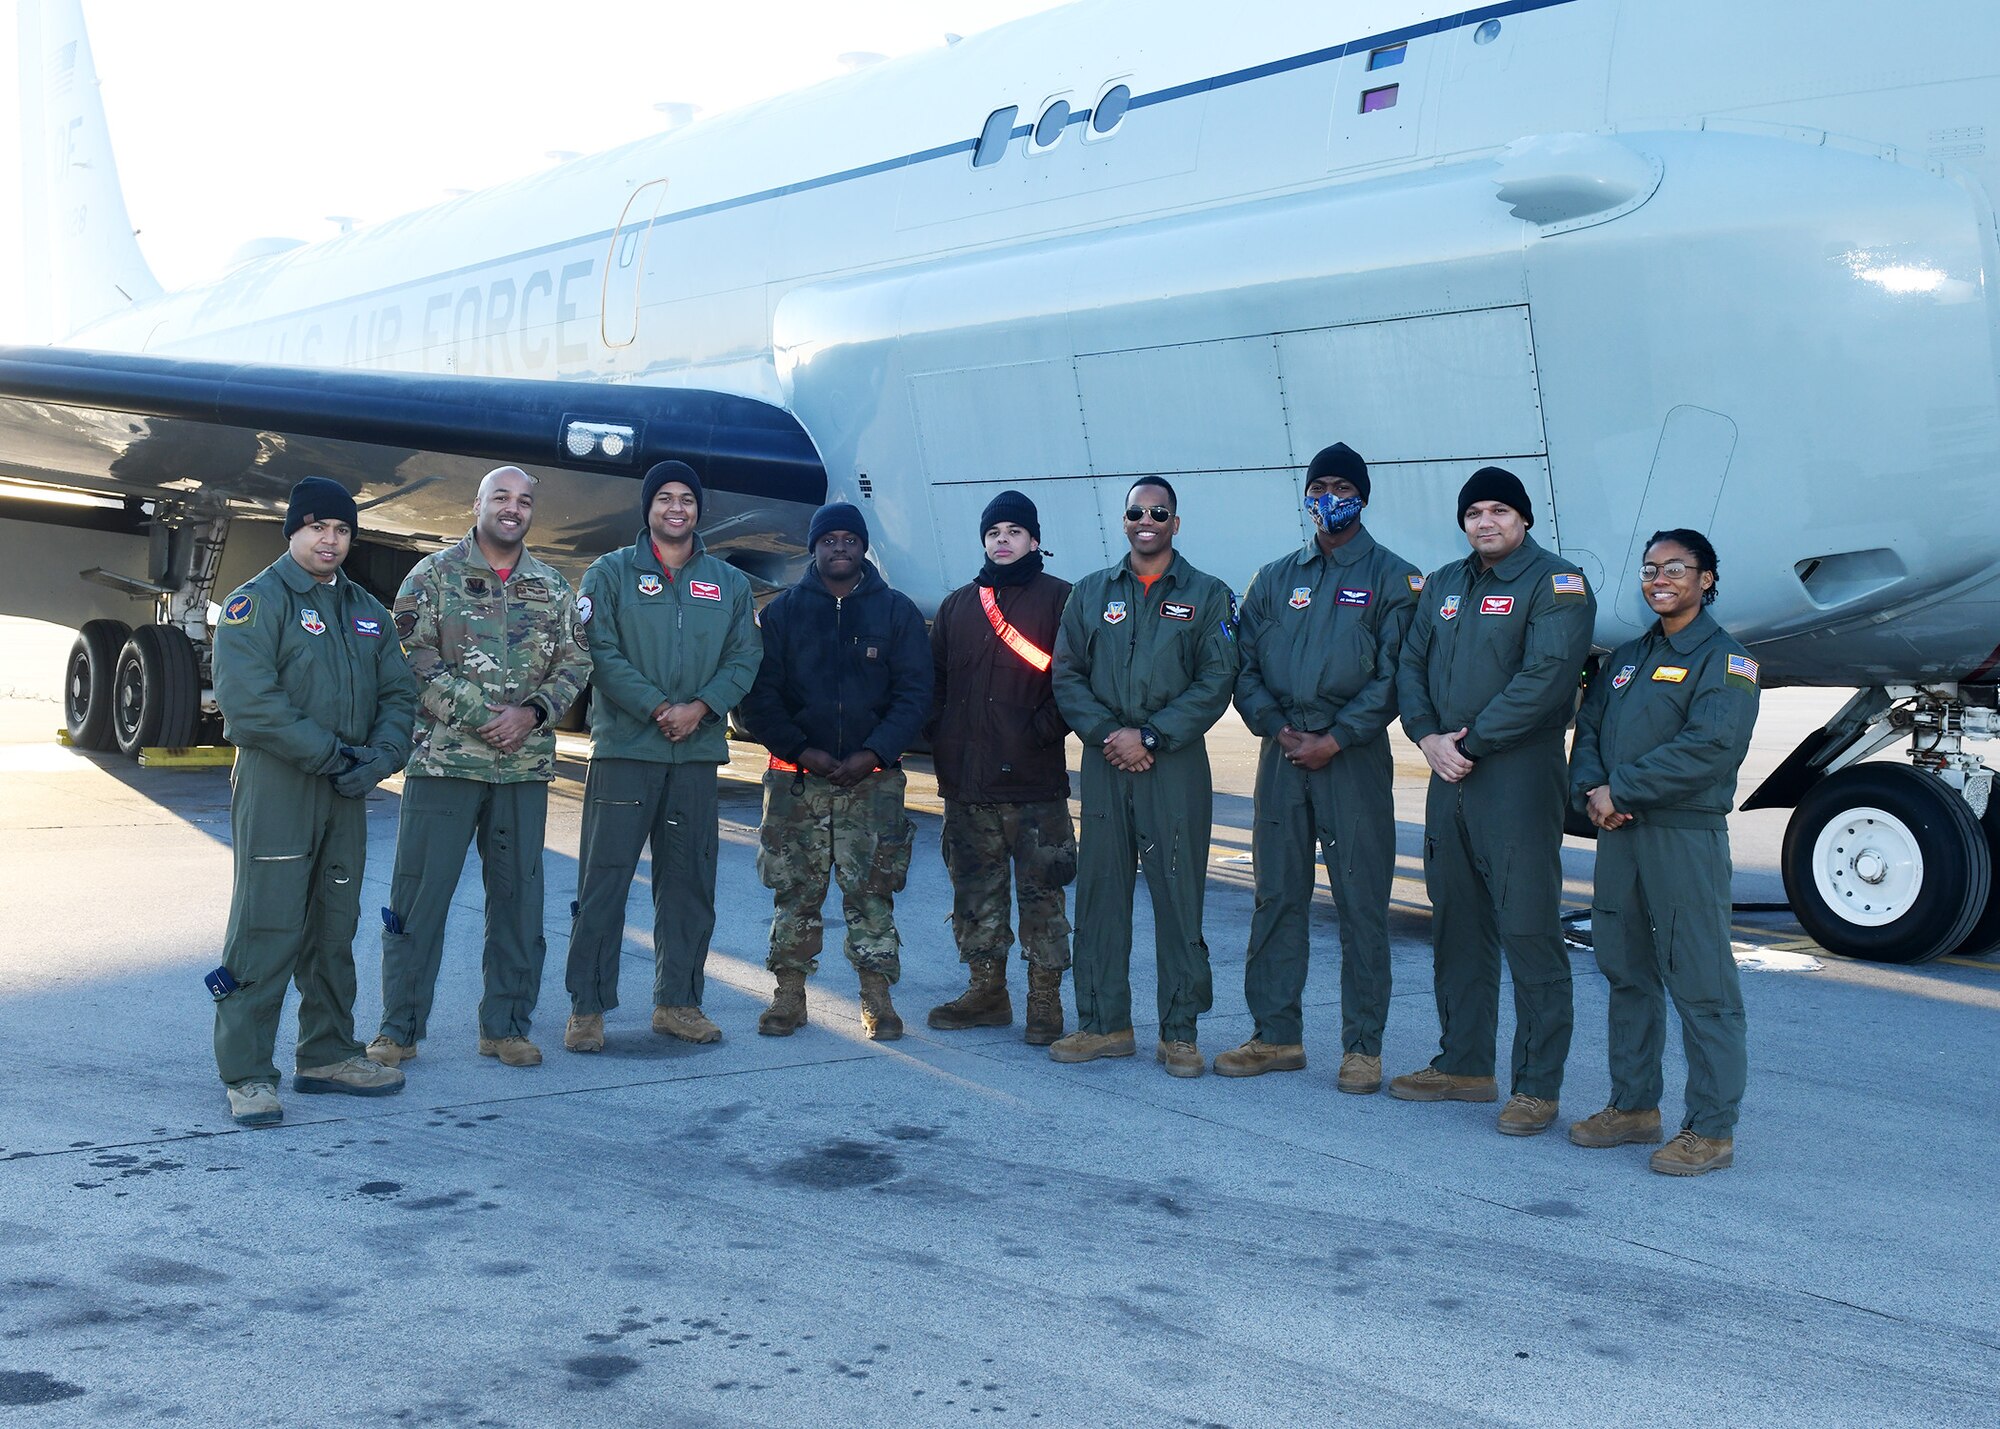 Airmen pose for a photo on the side of an aircraft.